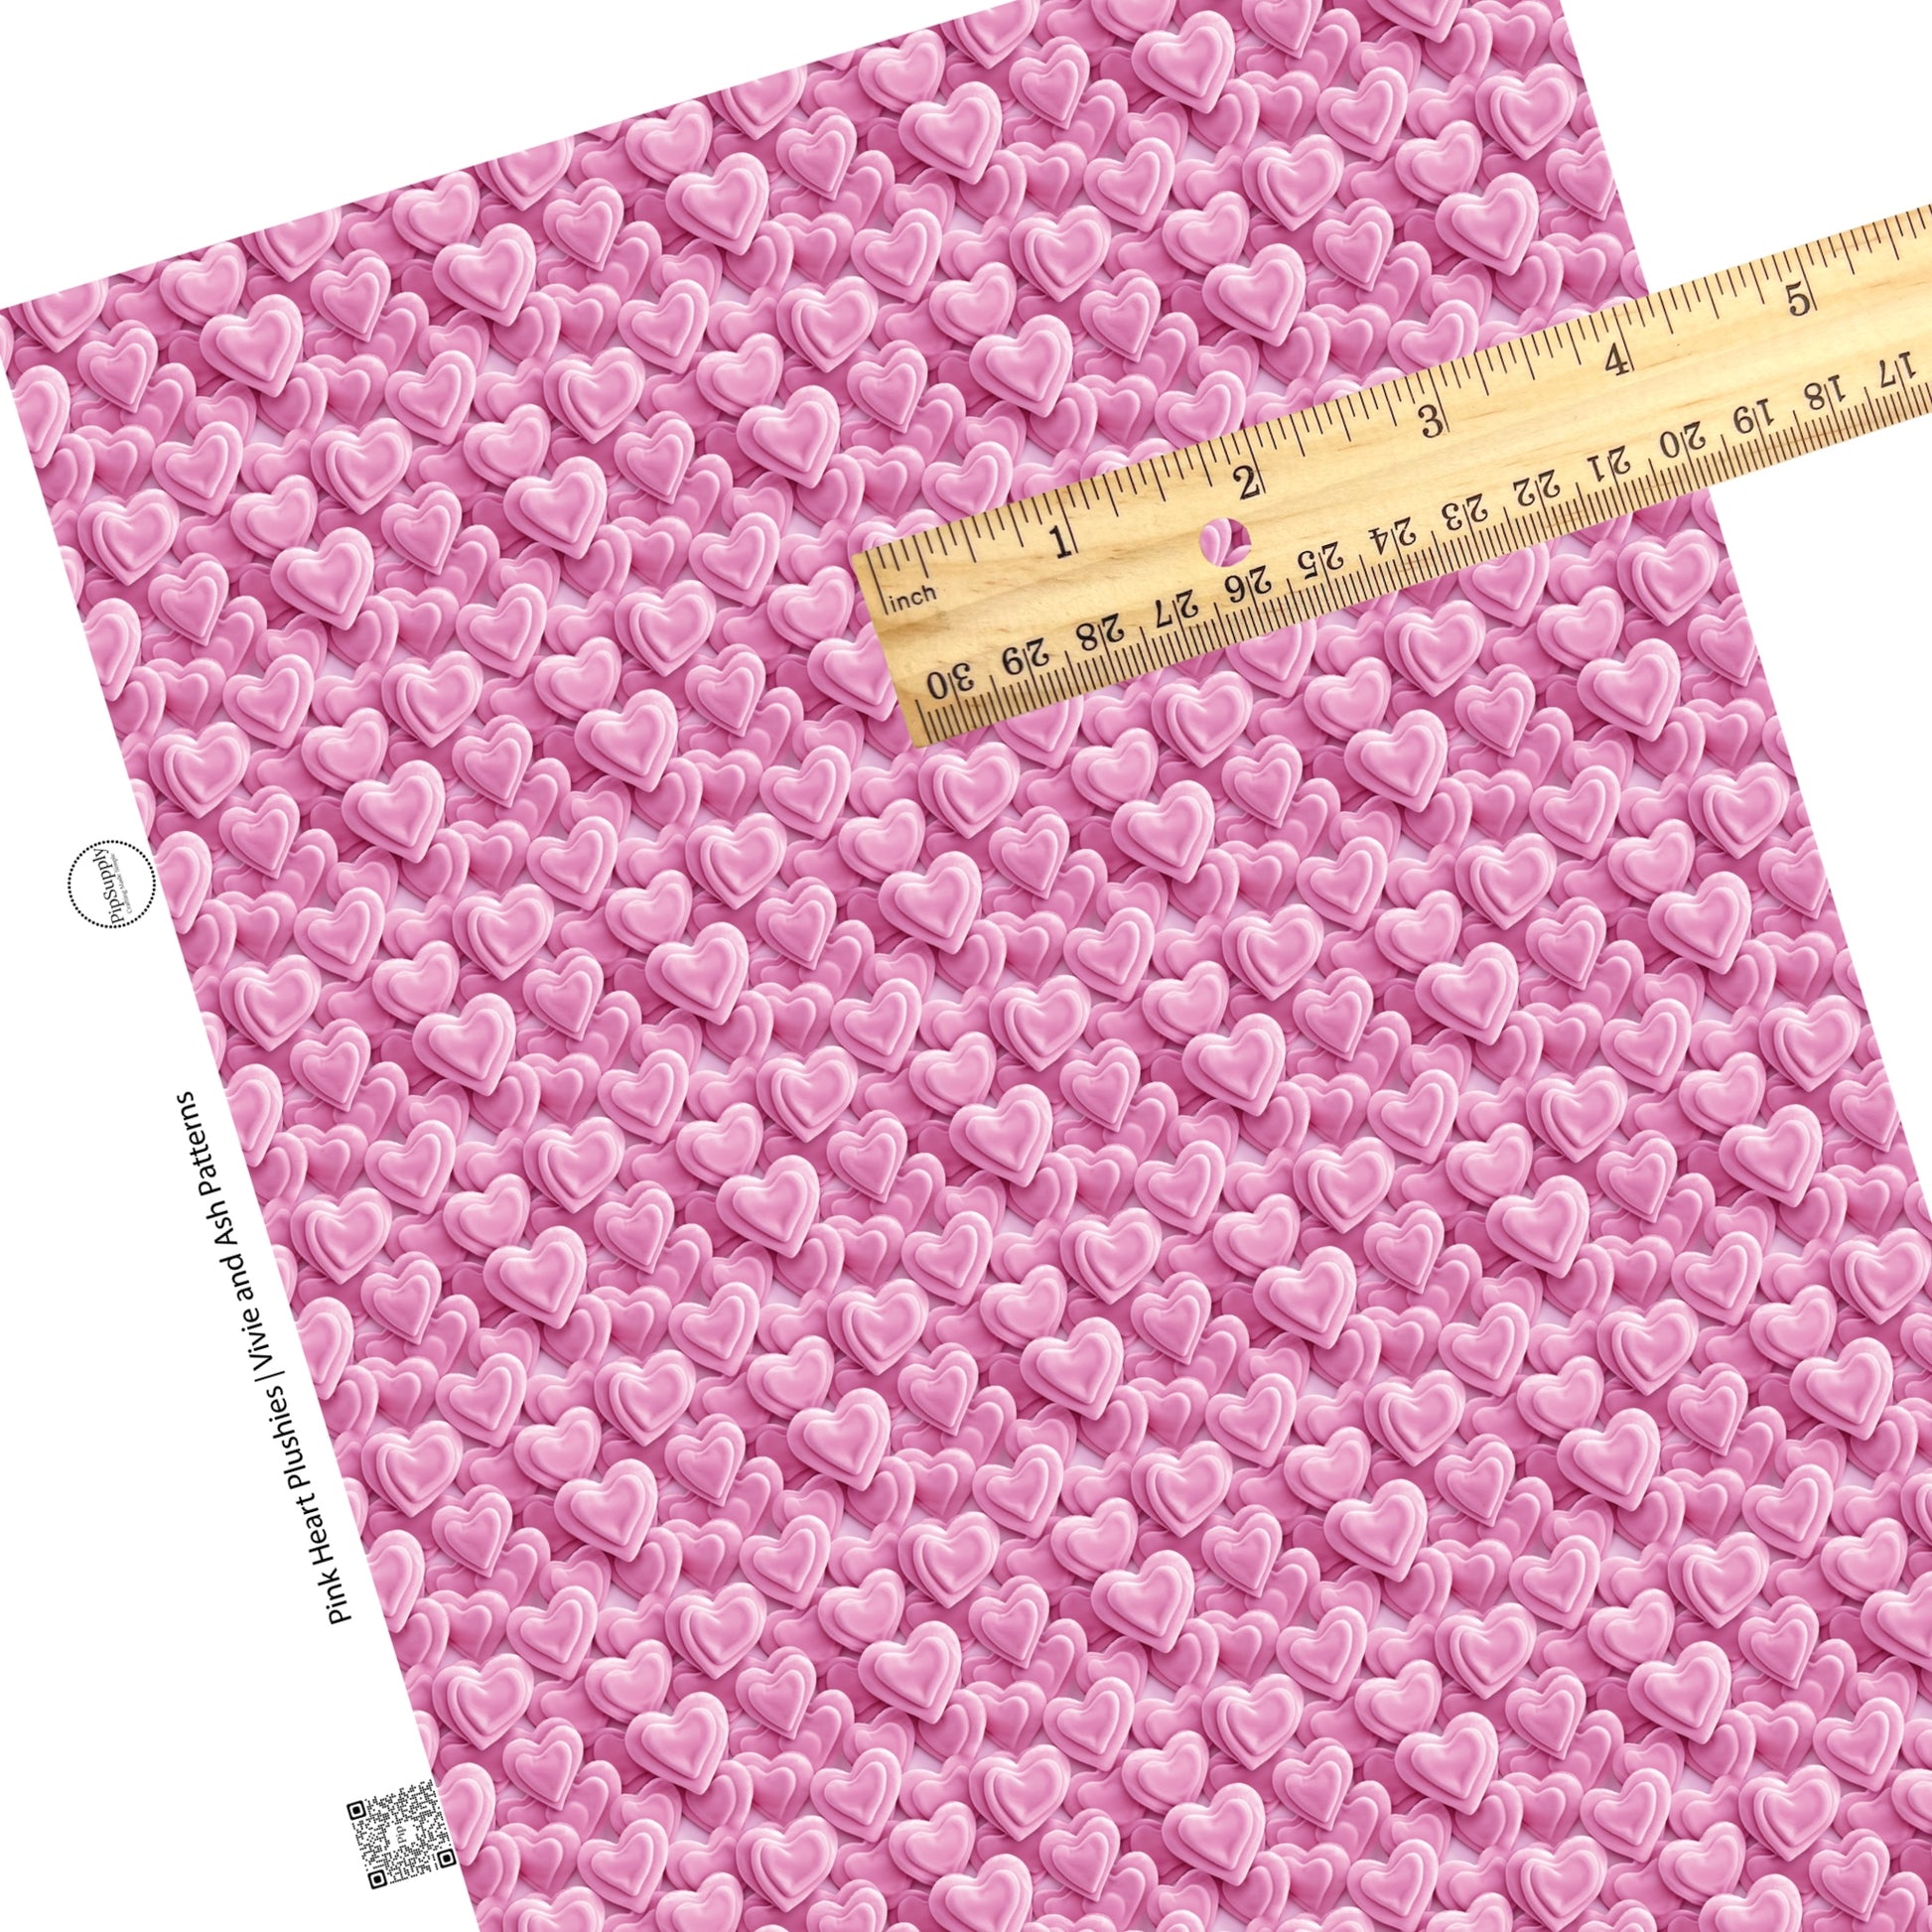 These embroidered faux leather sheets contain the following design elements: stacked pink heart plushies. Our CPSIA compliant faux leather sheets or rolls can be used for all types of crafting projects.